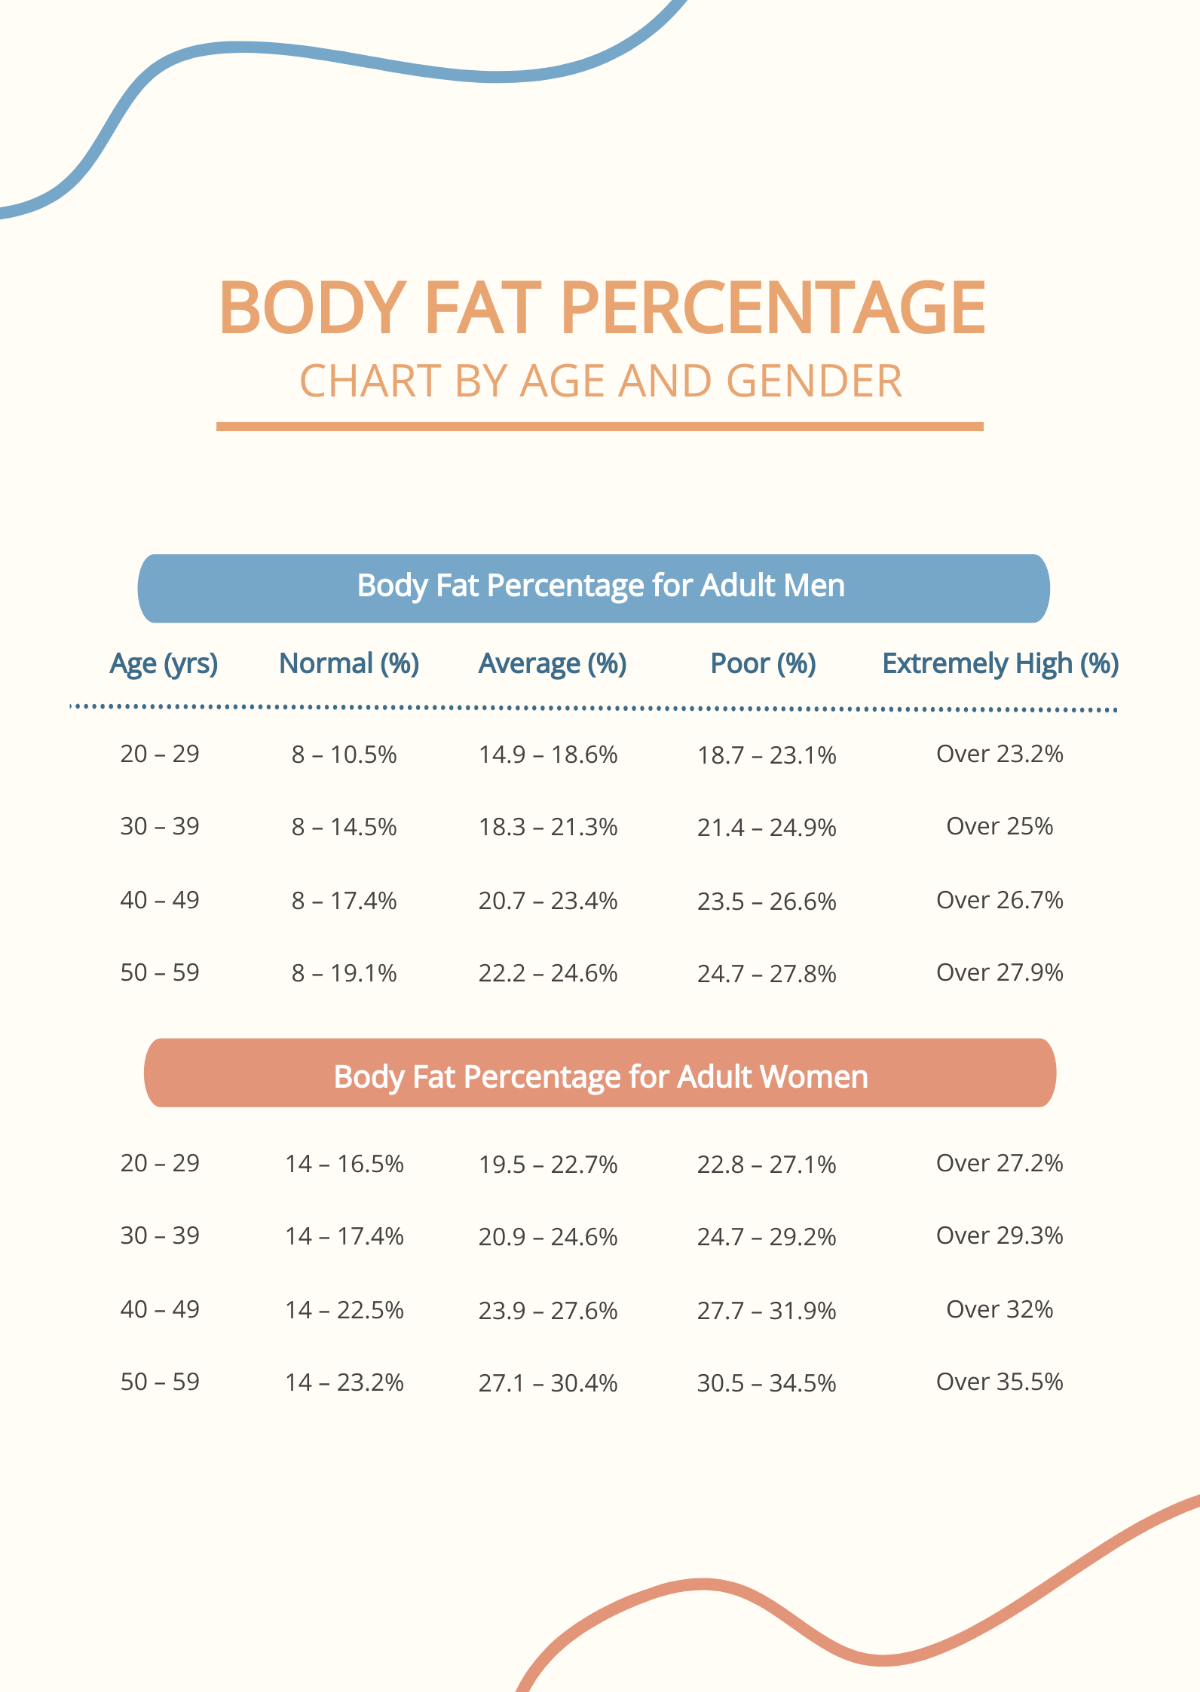 Body Fat Percentage Chart By Age And Gender